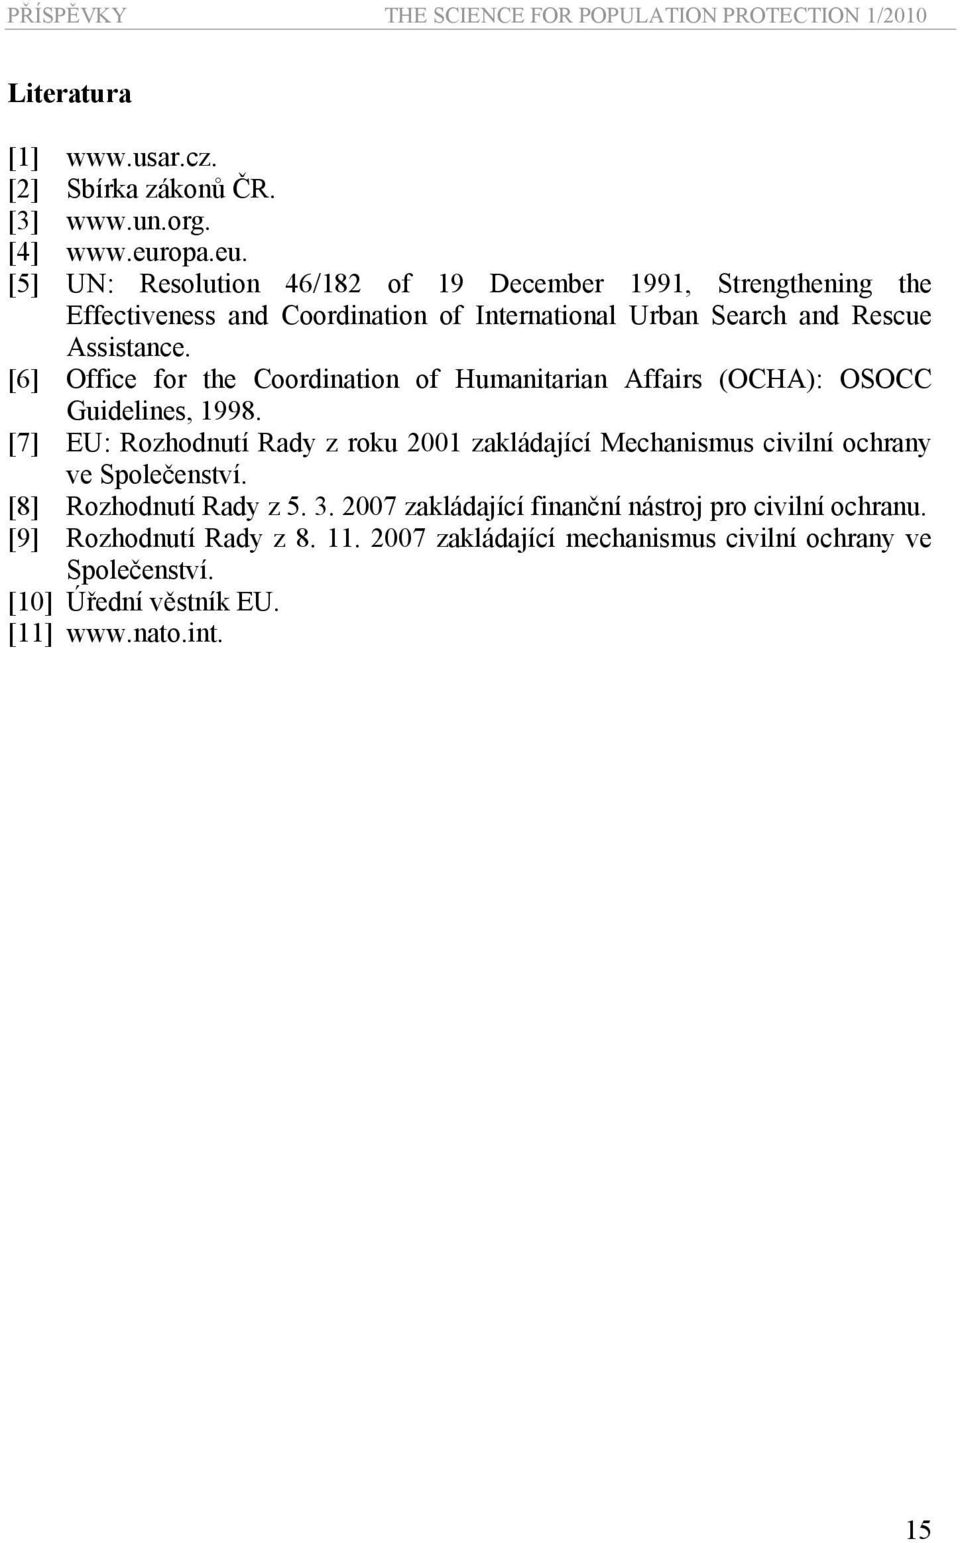 [6] Office for the Coordination of Humanitarian Affairs (OCHA): OSOCC Guidelines, 1998.